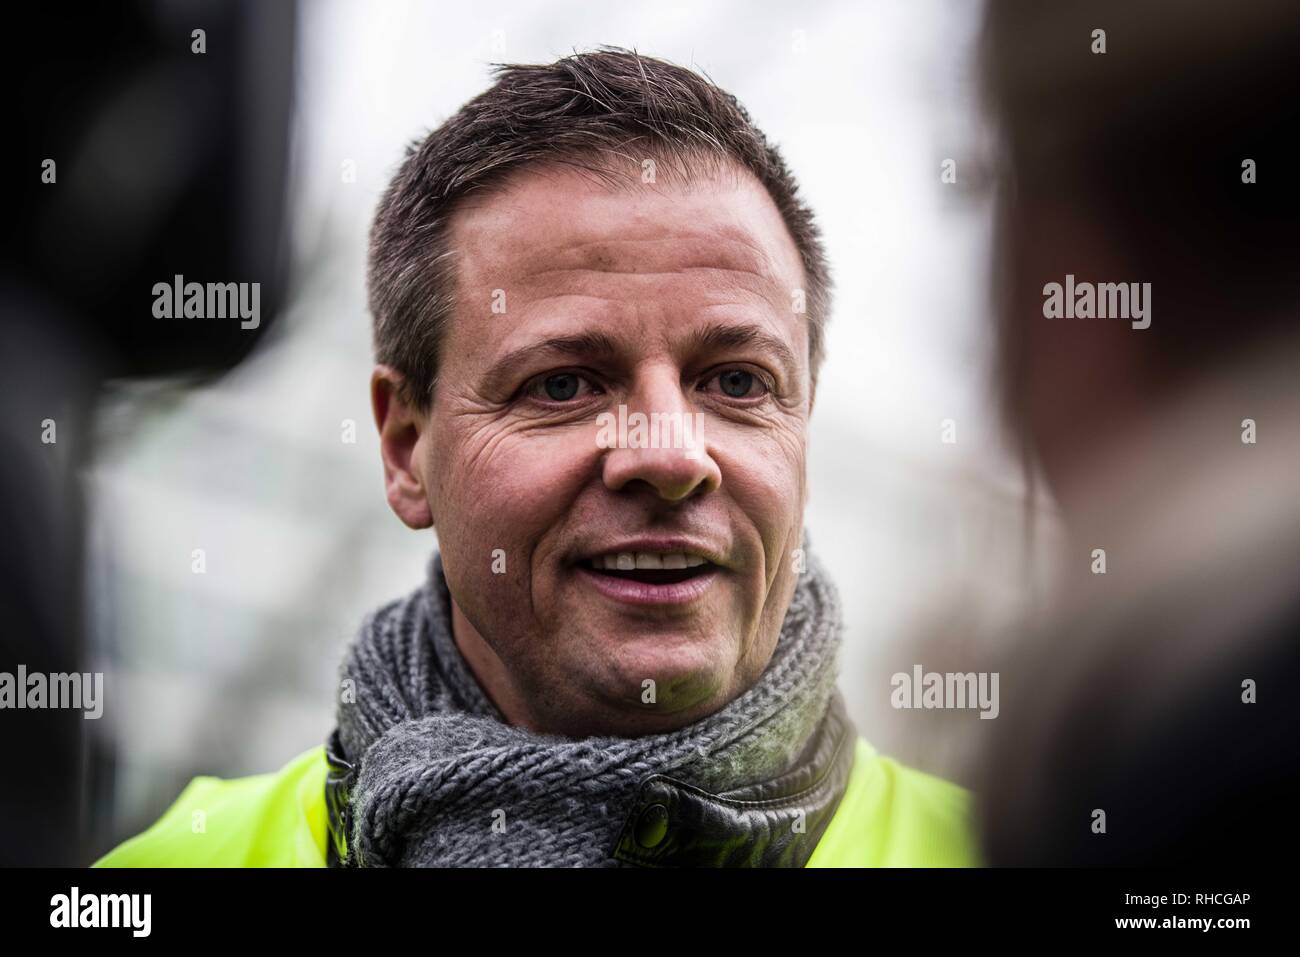 Munich, Bavaria, Germany. 2nd Feb, 2019. Michael Haberland of the Mobil De firm that organized the demonstration. Responding to the prospect of diesel auto bans in major cities in Germany, protestors assembled at an air quality monitoring station in Munich's city center. Credit: ZUMA Press, Inc./Alamy Live News Stock Photo